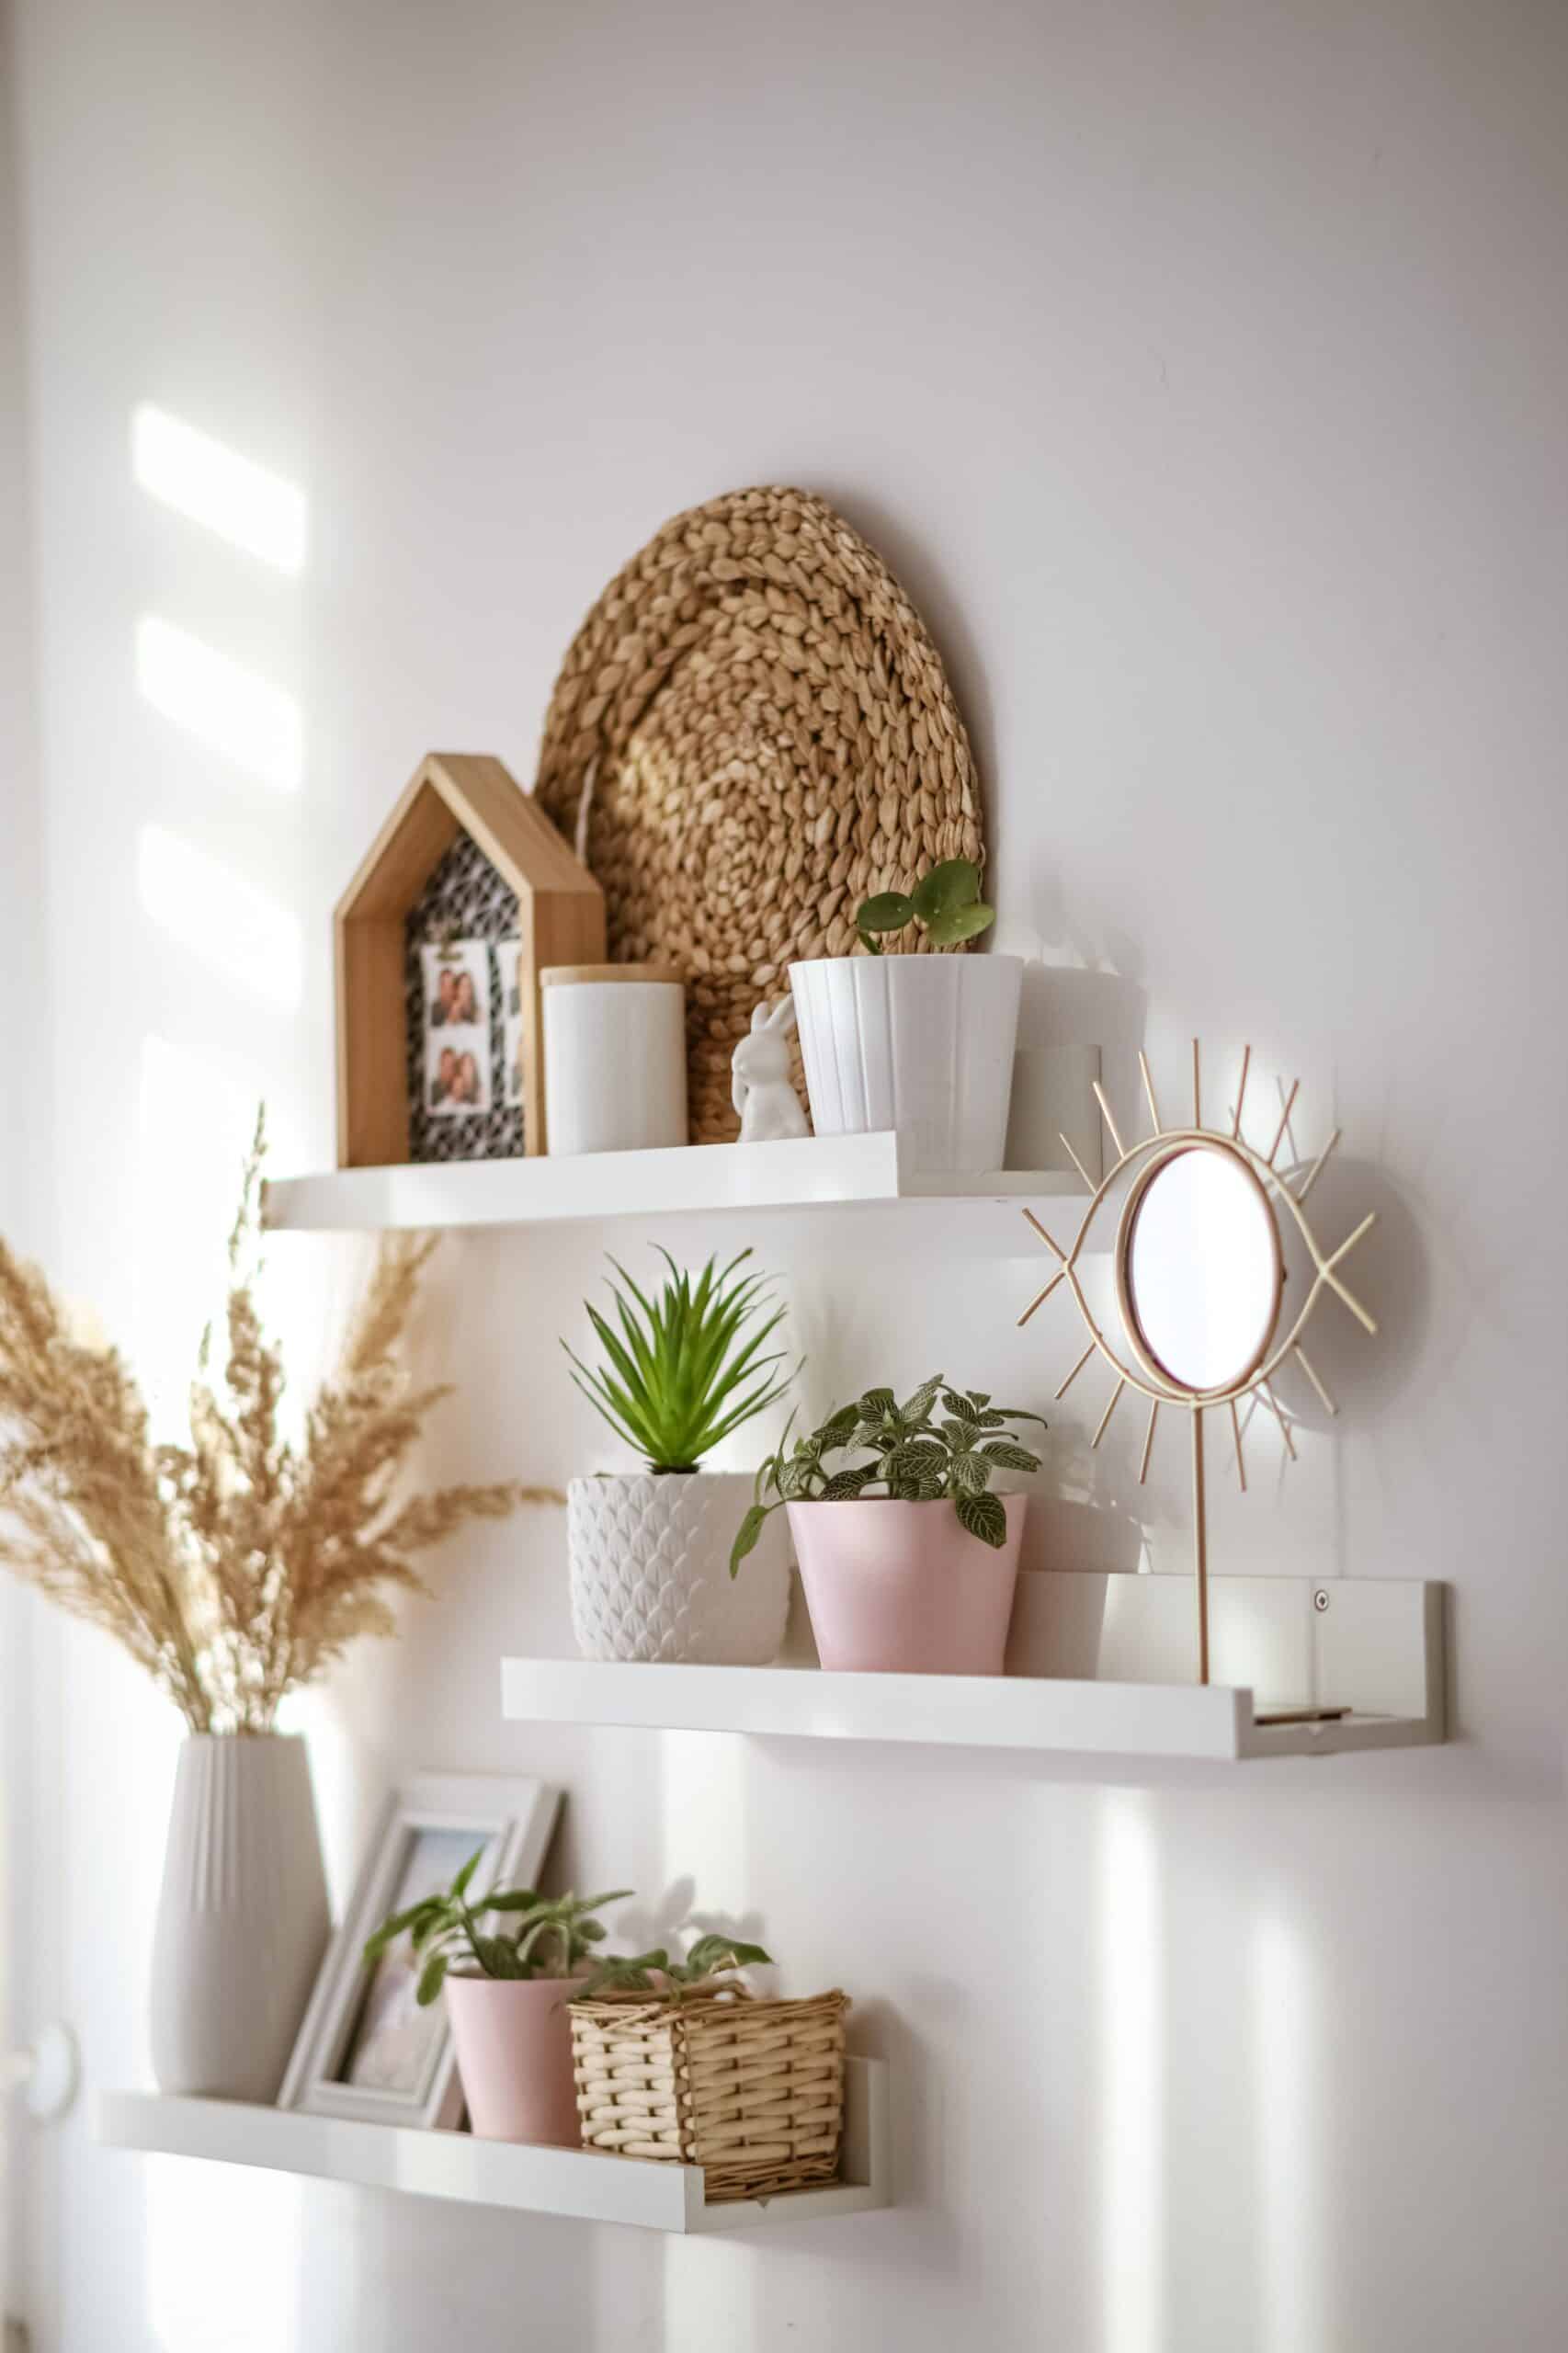 White wall shelves created, installed and styled by TopShelf UK as part of their learn to style a shelf guide